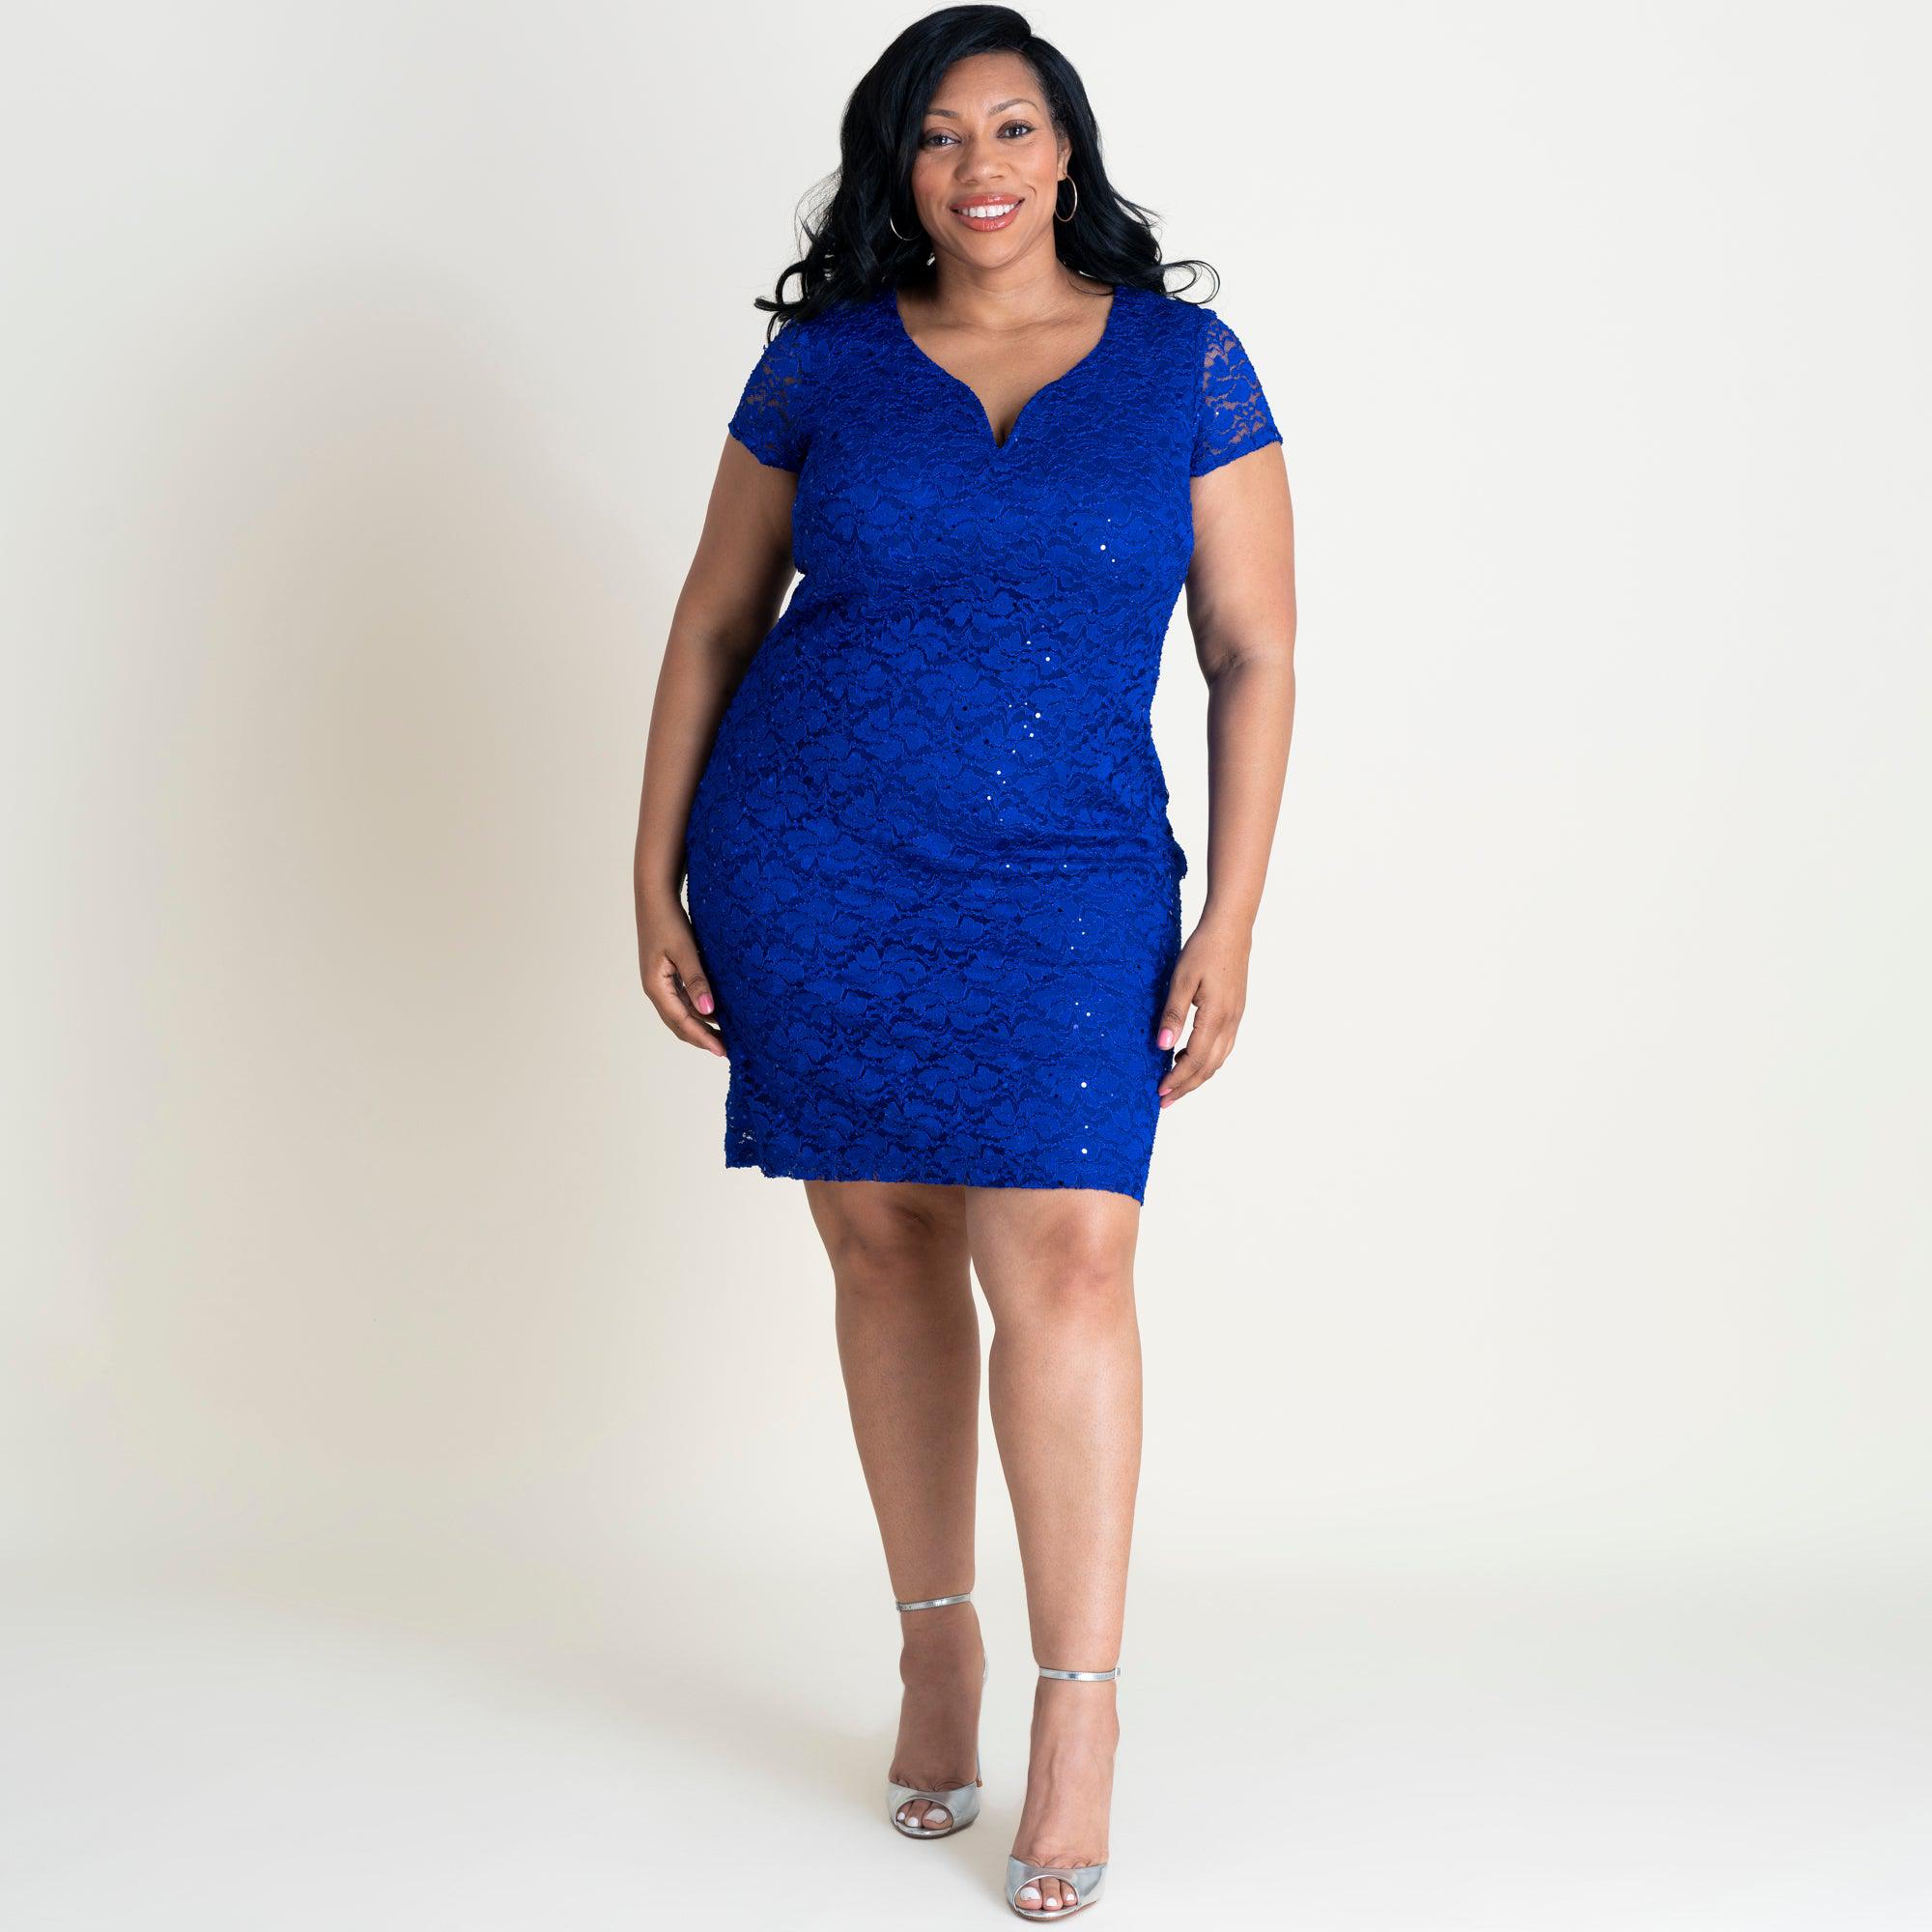 Woman posing wearing Cobalt Gracie Cobalt Blue Sequin Lace Cocktail Dress from Connected Apparel